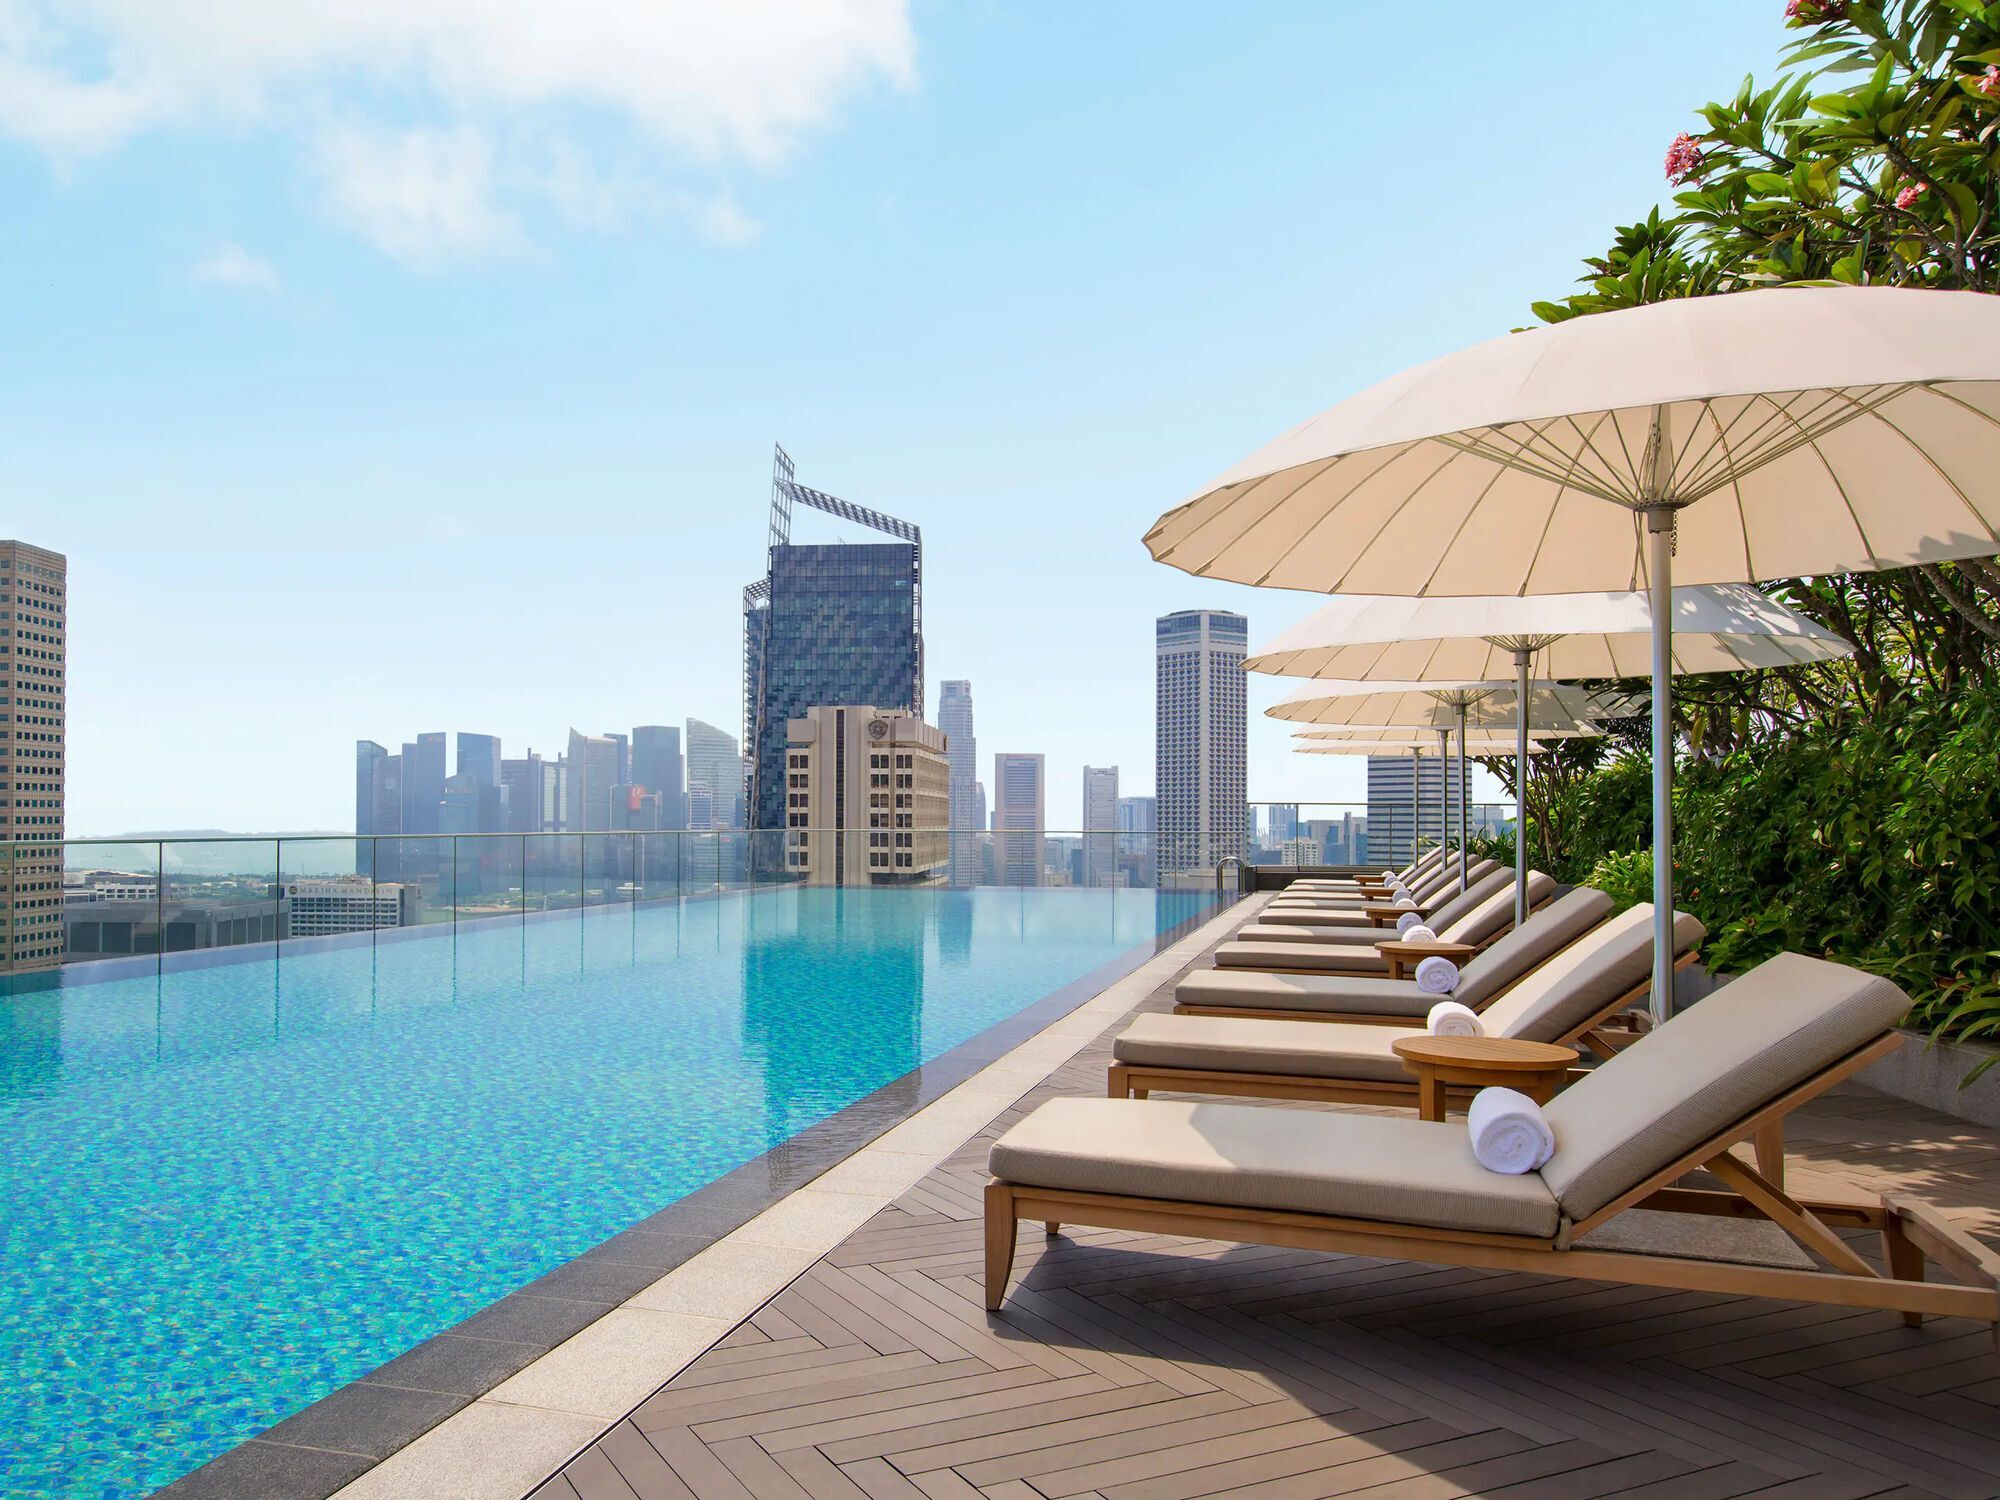 Top 13 hotels in Singapore: from luxury resorts with infinity rooftop pools to sophisticated boutiques with iconic bars